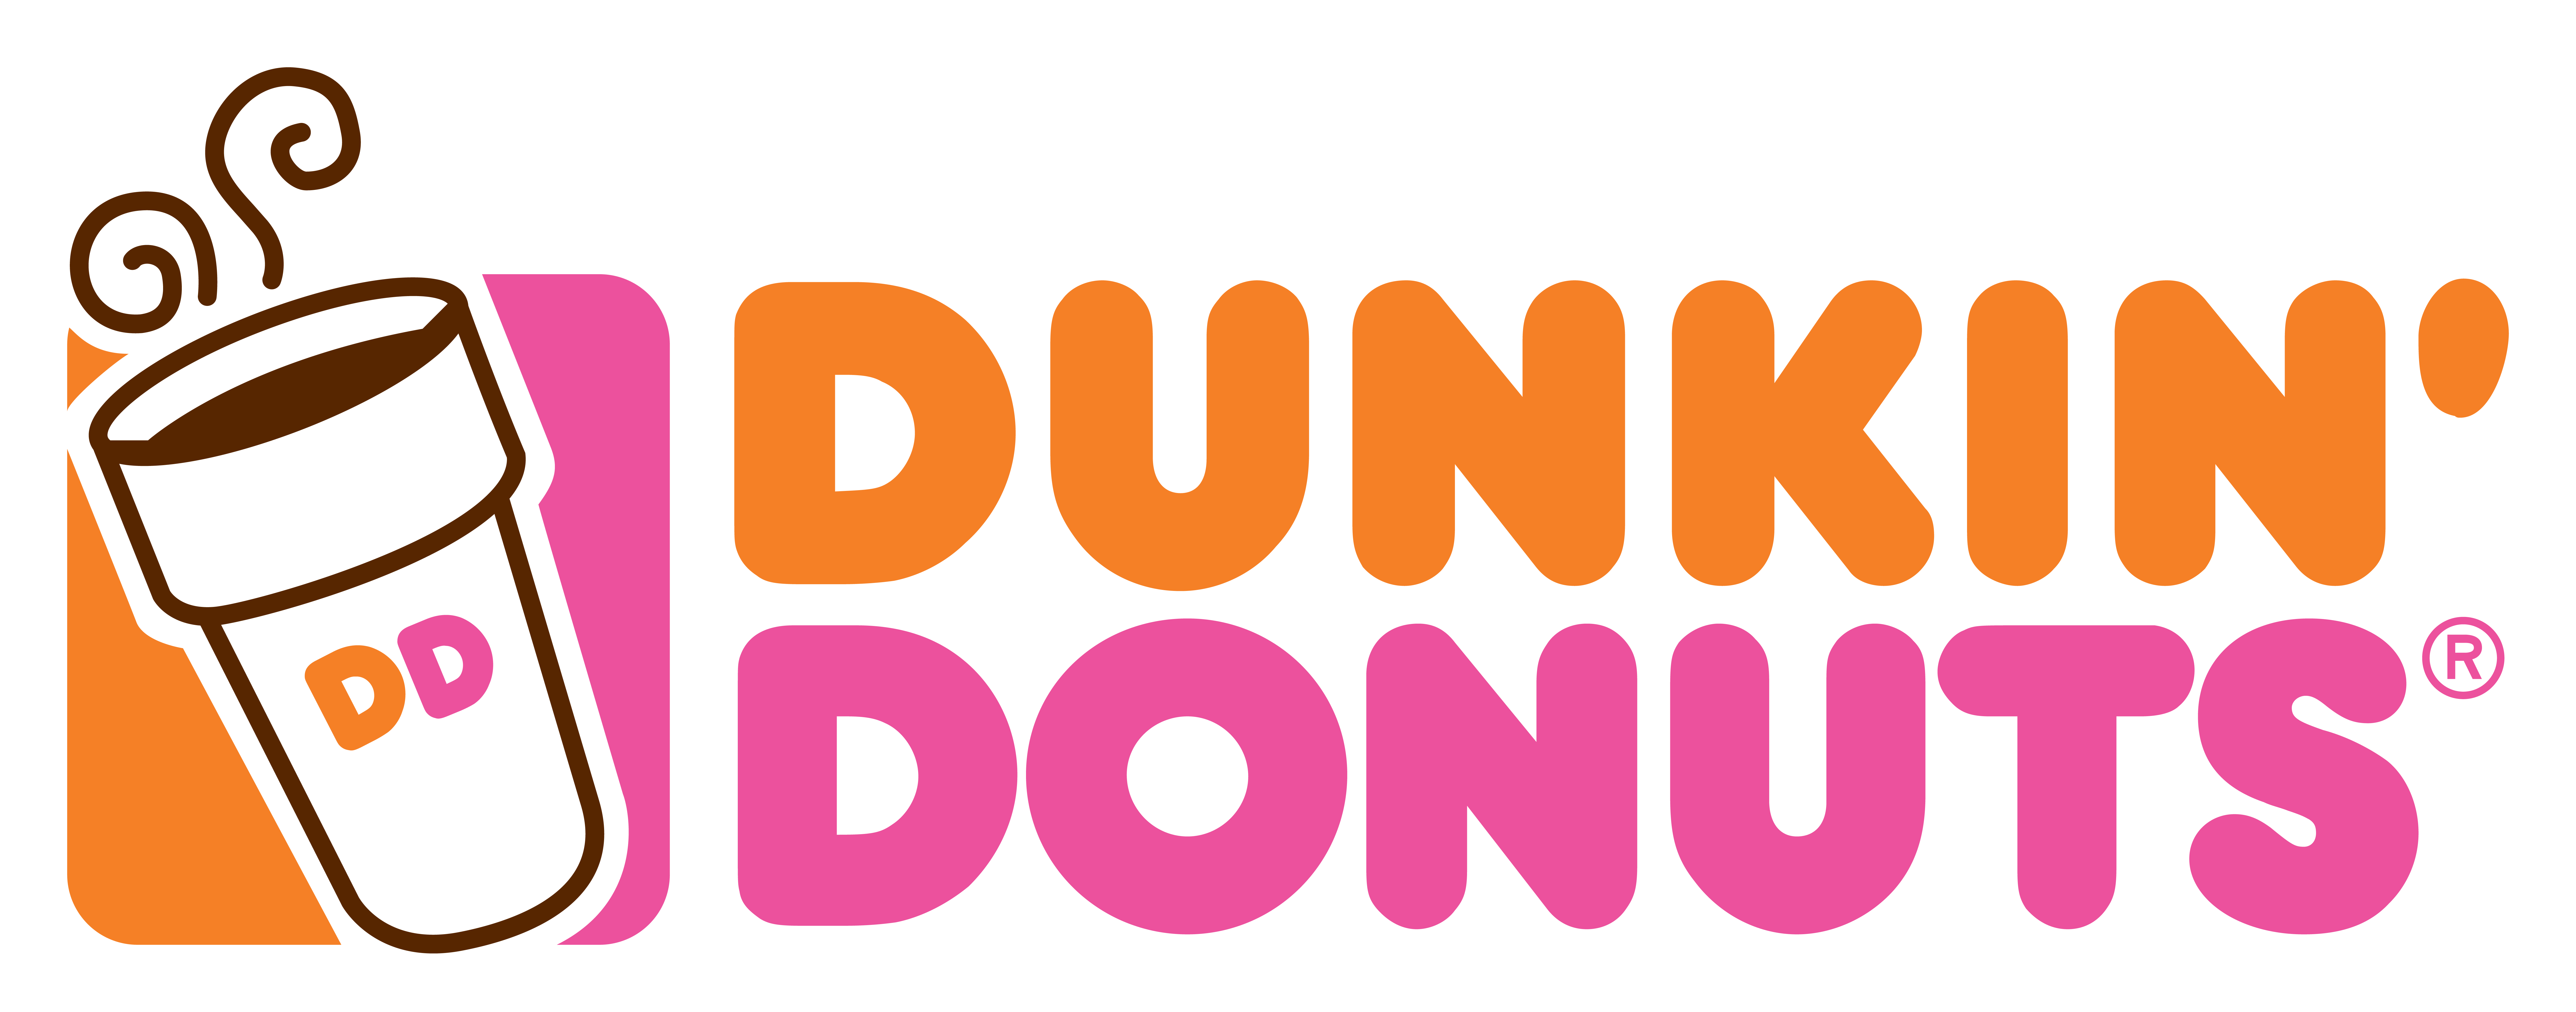 1 Dunkin' Donuts HD Wallpapers | Backgrounds - Wallpaper Abyss